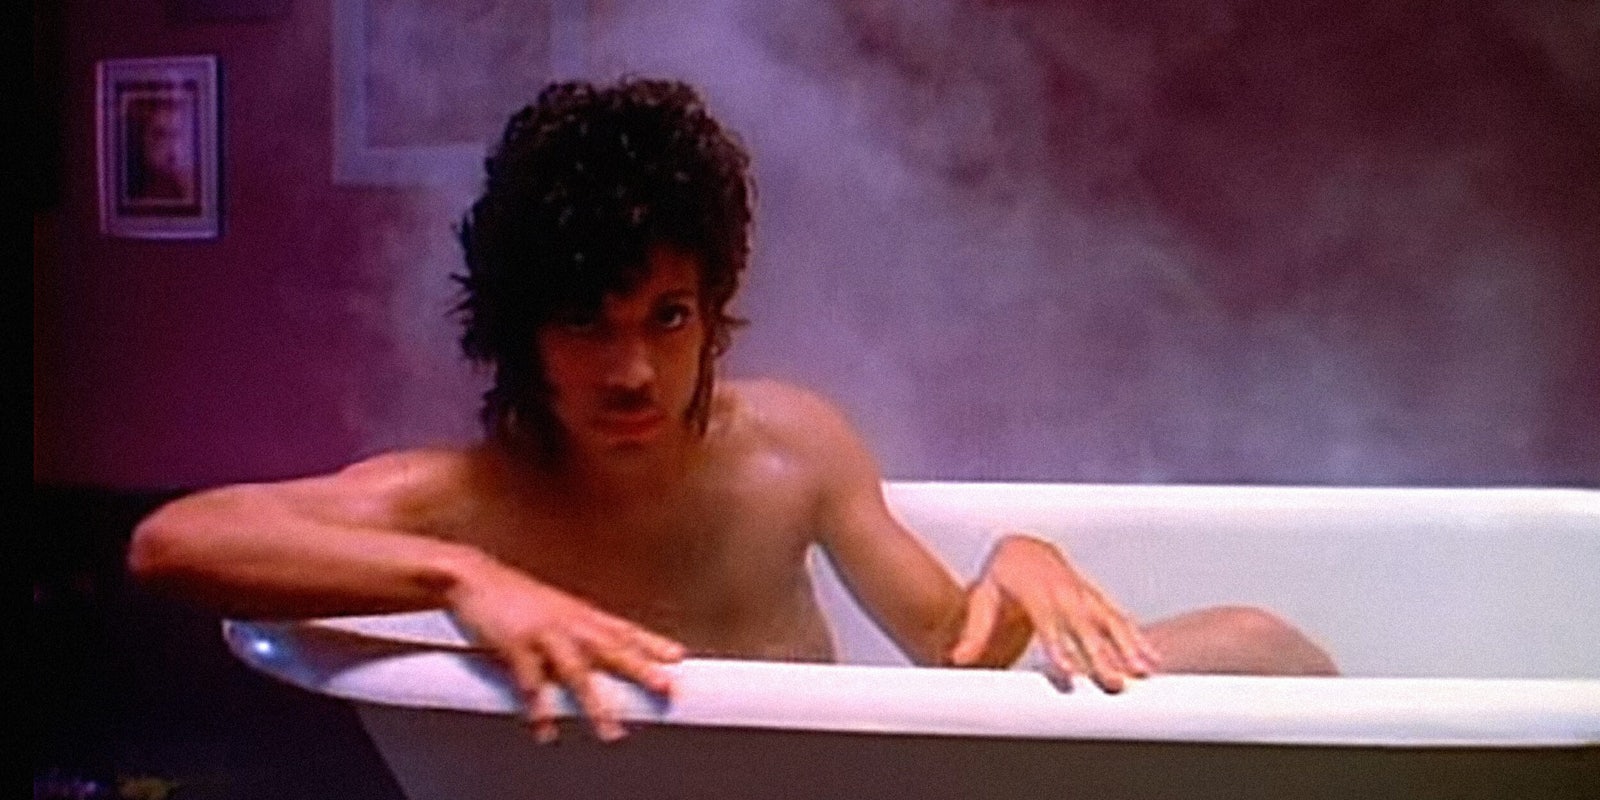 Prince in bathtub, When Doves Cry video